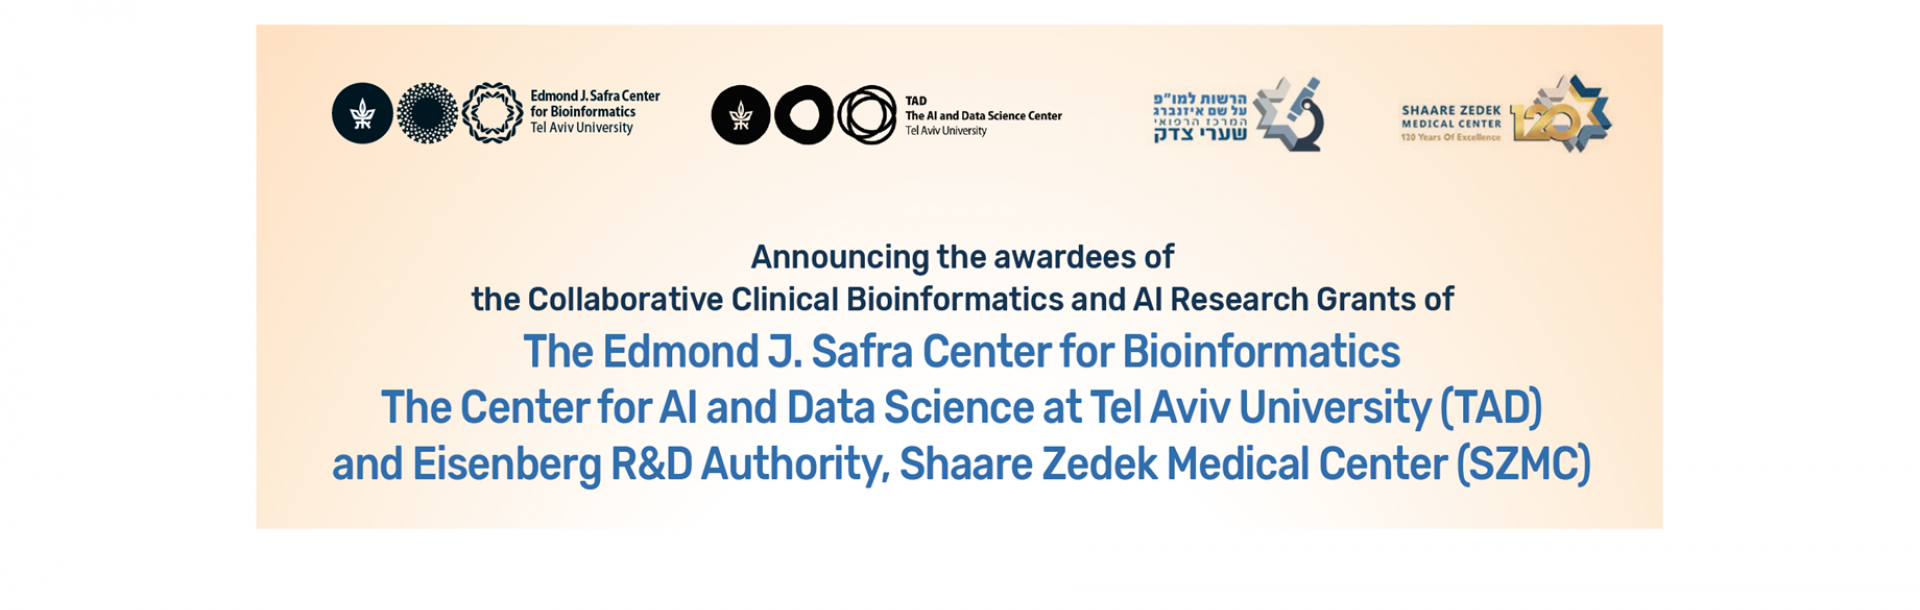 Thank you to all who submitted a proposal for the Collaborative Clinical Bioinformatics and AI Research Grants of the Edmond J. Safra Center for Bioinformatics, the Center for AI and Data Science (TAD) and Eisenberg R&amp;D Authority, Shaare Zedek Medical Center.

